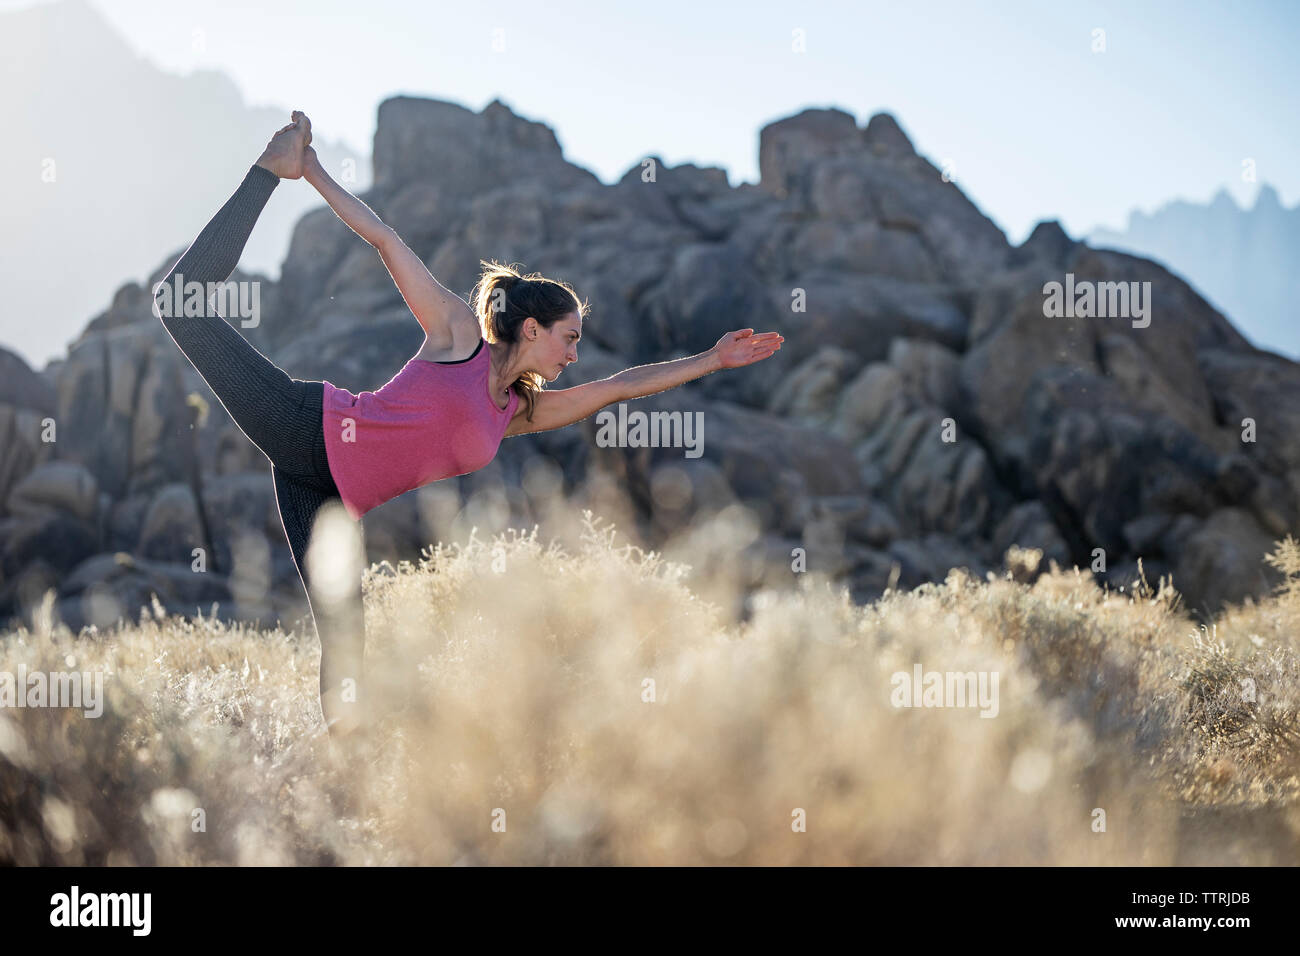 Woman standing on one leg while practicing yoga on field against mountains Stock Photo